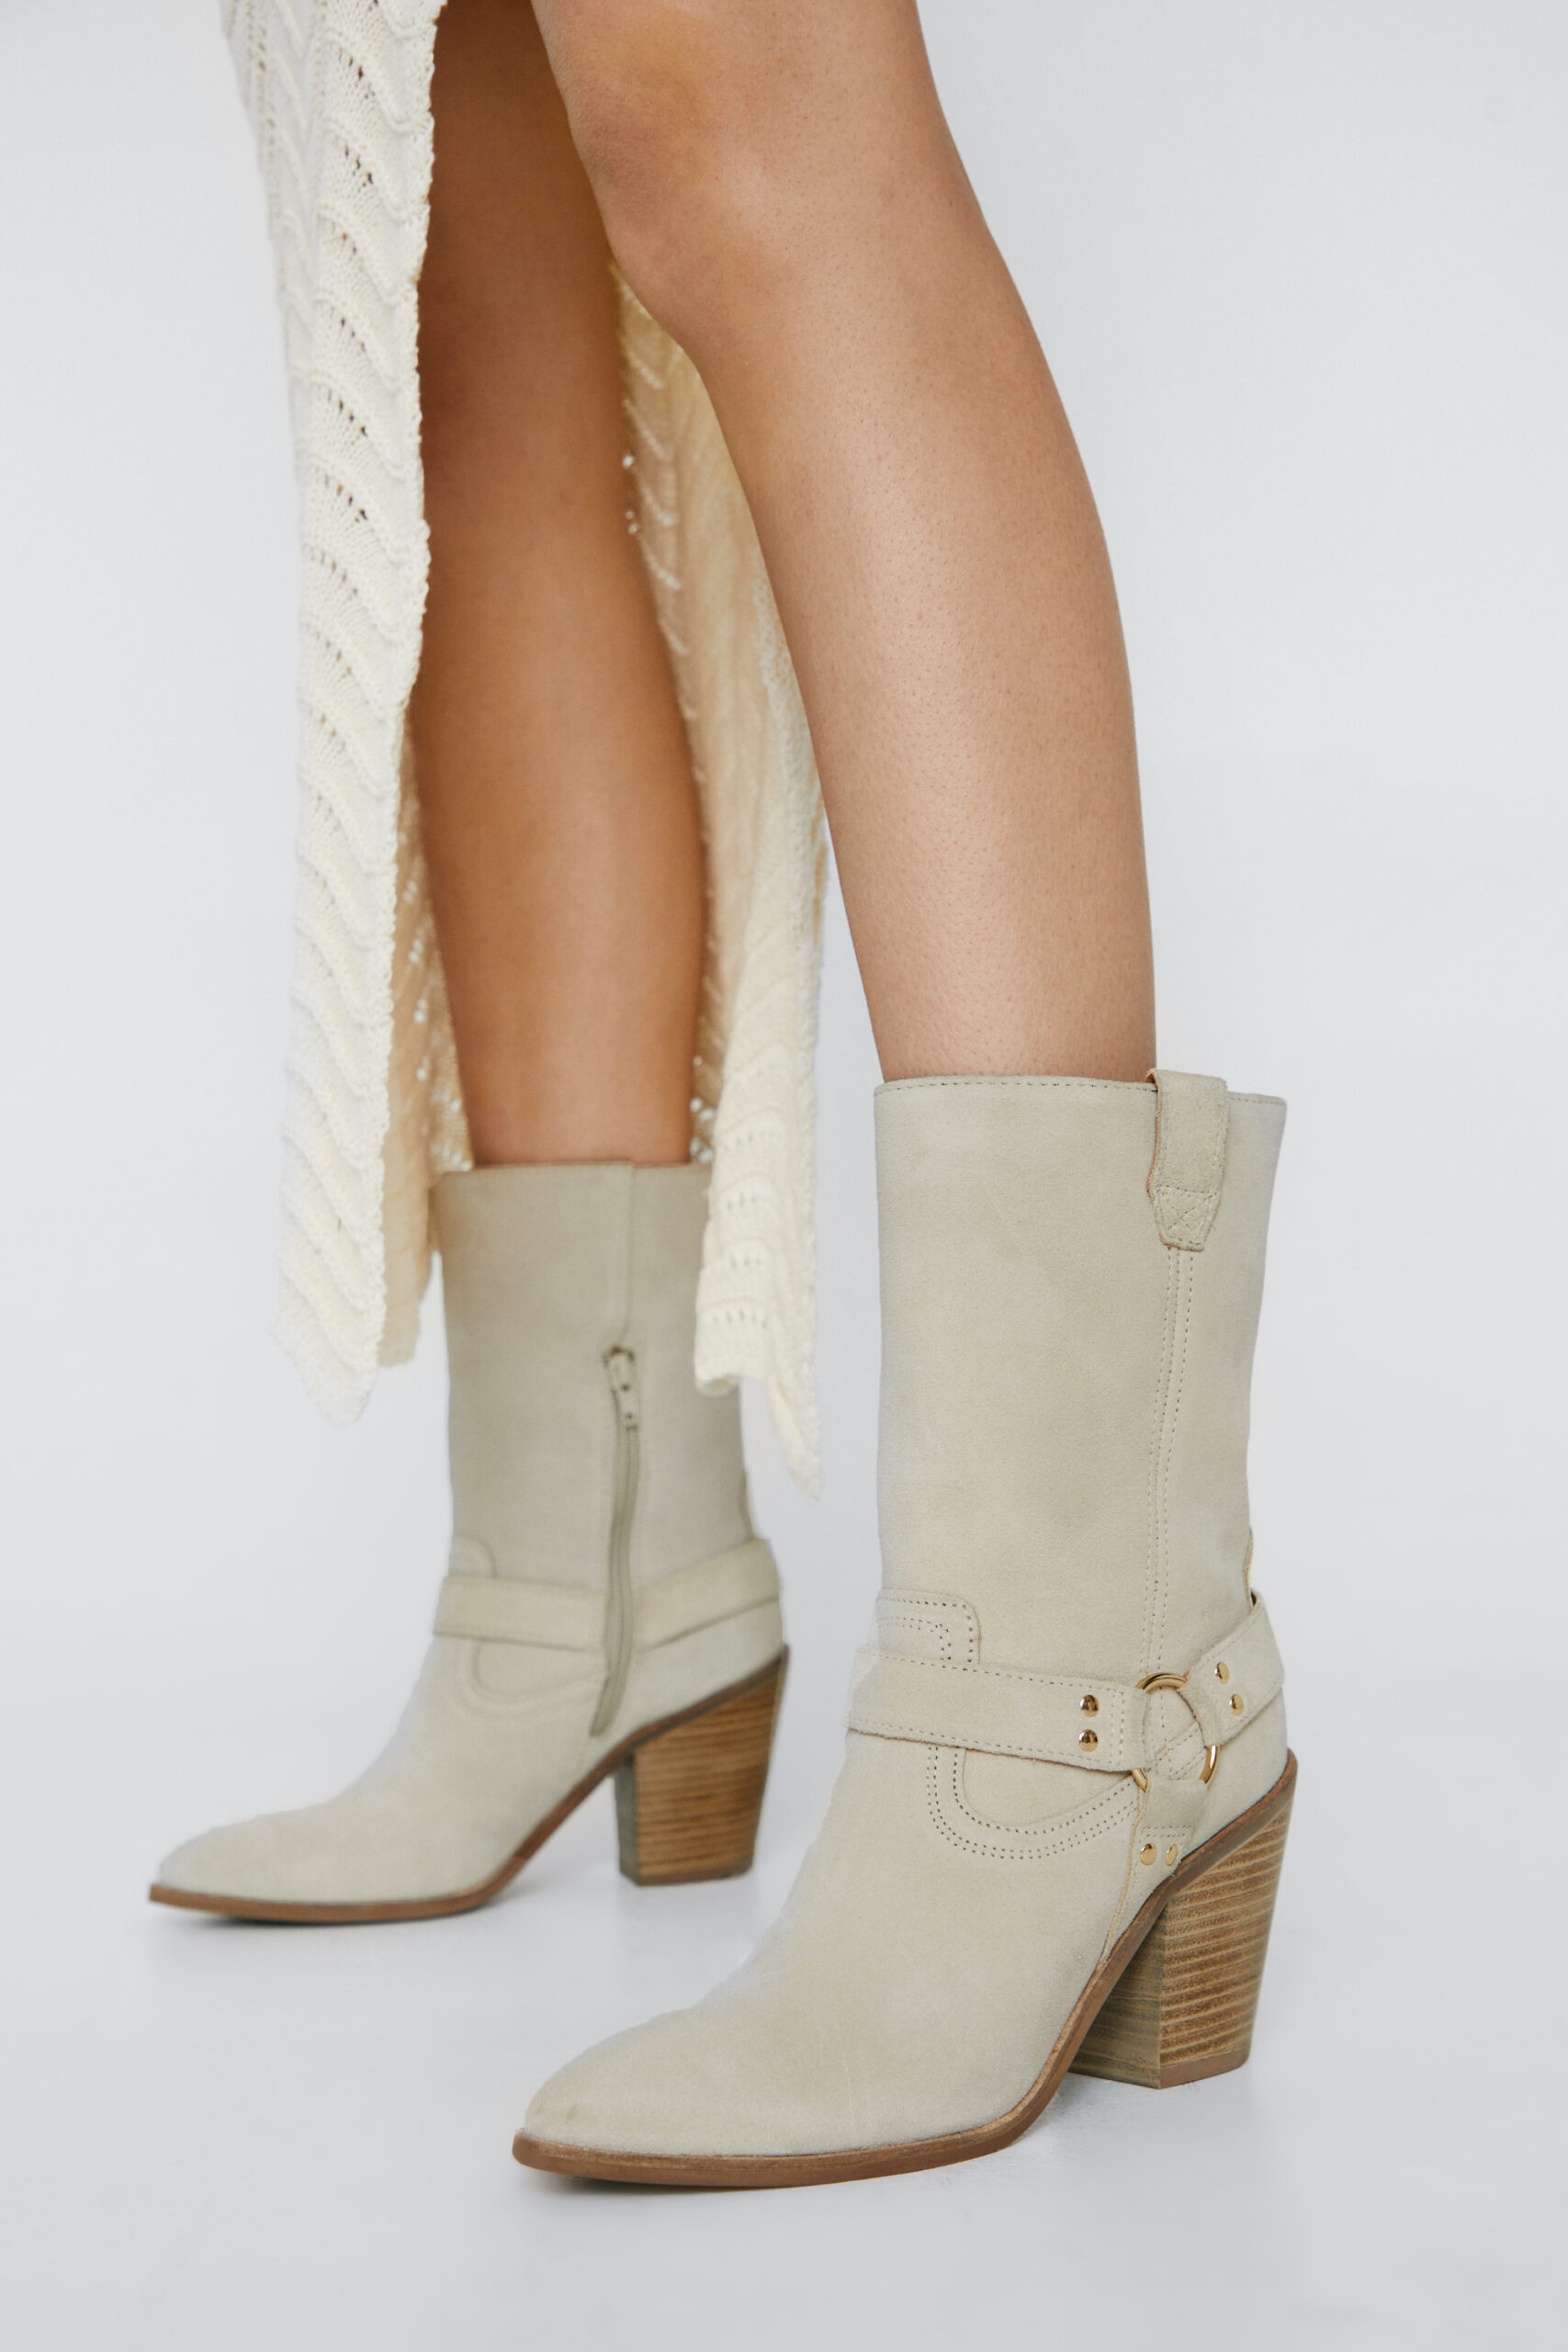 Suede Western Boots With Harness Details